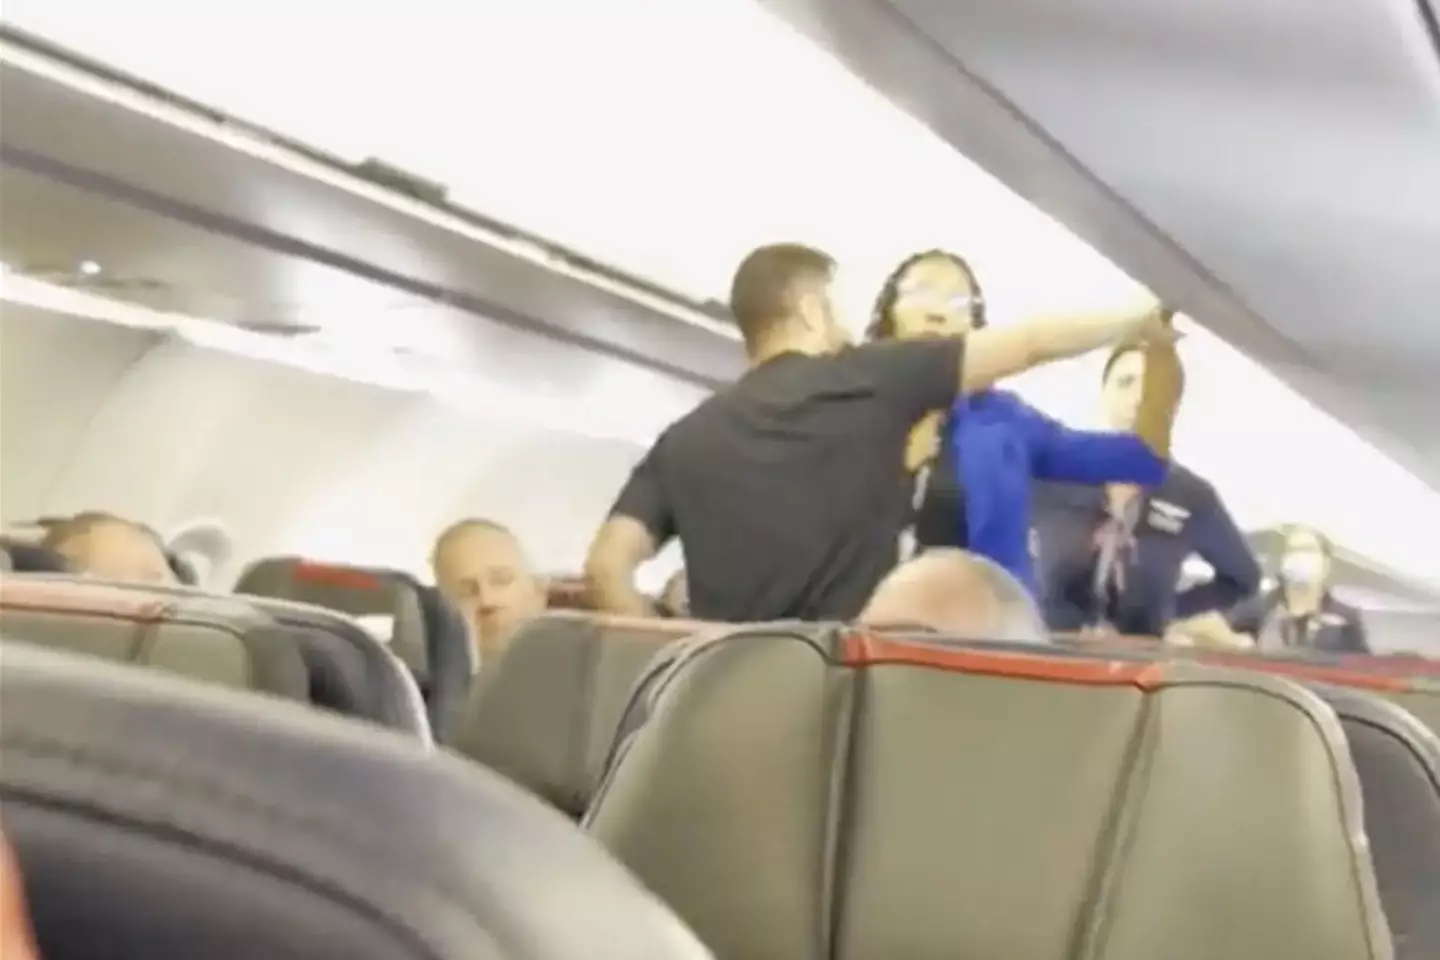 The man shouted racist and homophobic slurs on board.